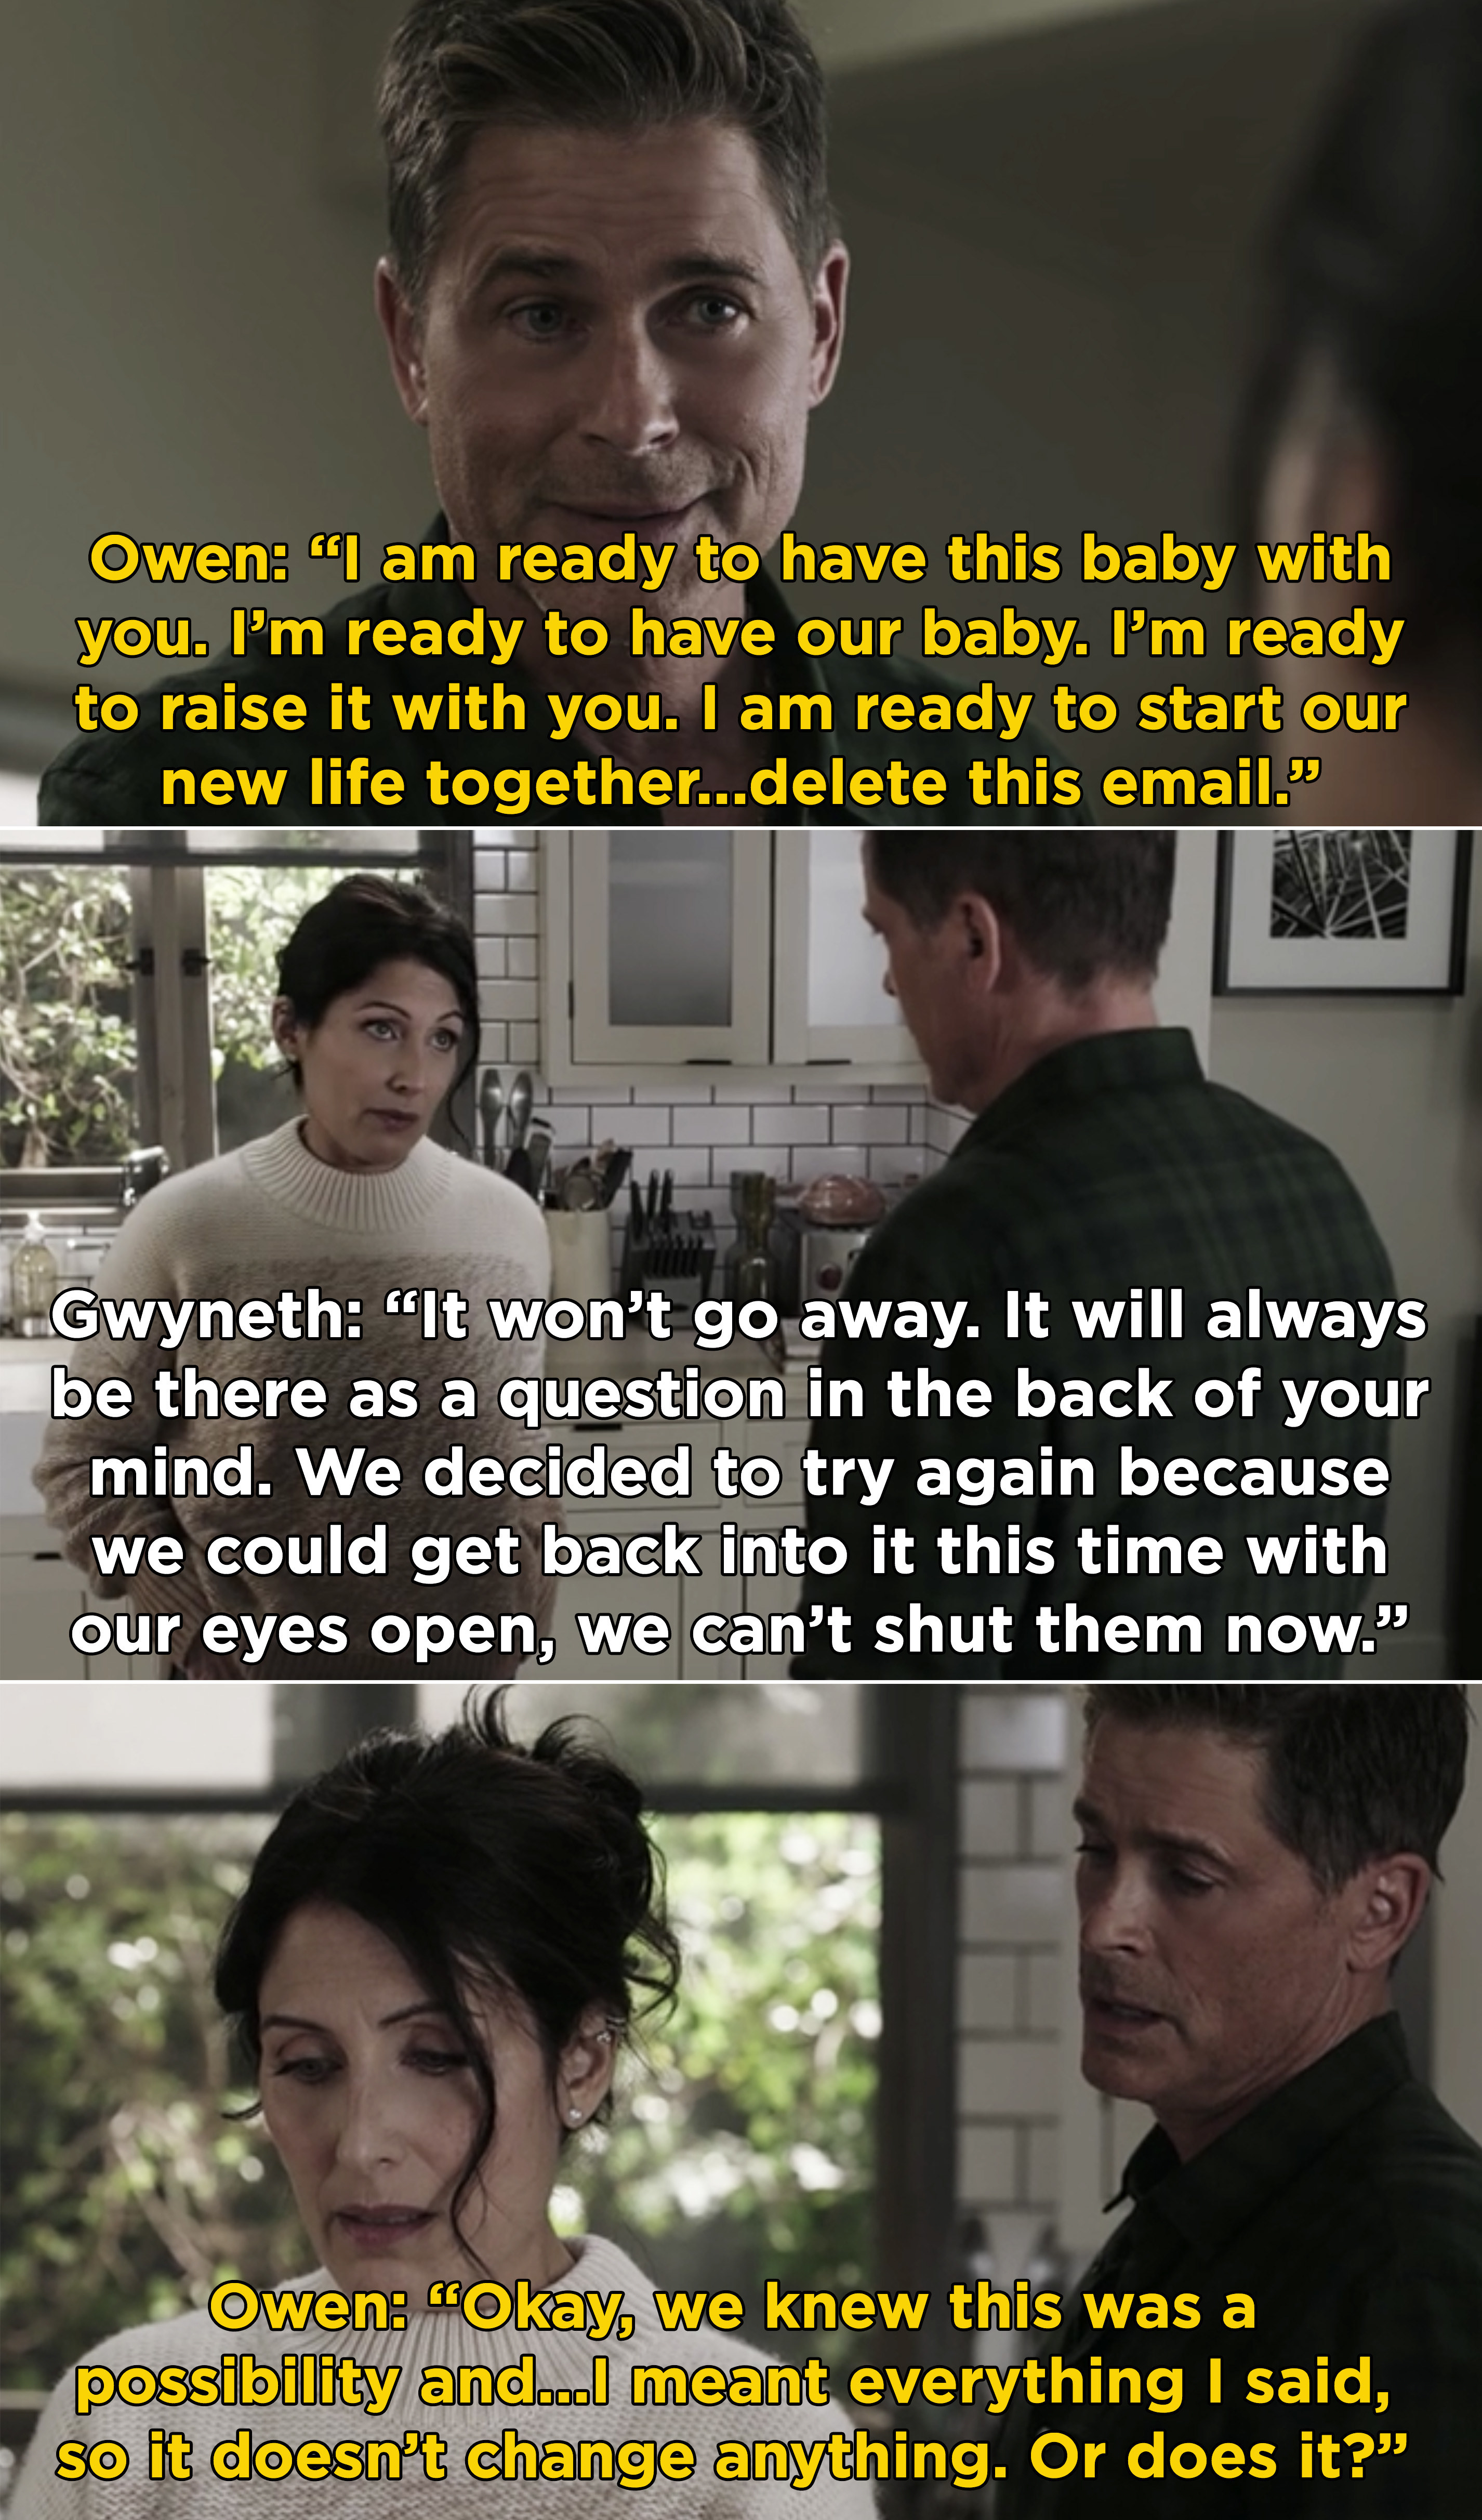 Owen telling Gwyneth he wants to raise this baby with her no matter what, so to just delete the paternity test email. But, Gwyneth says they can&#x27;t run from it